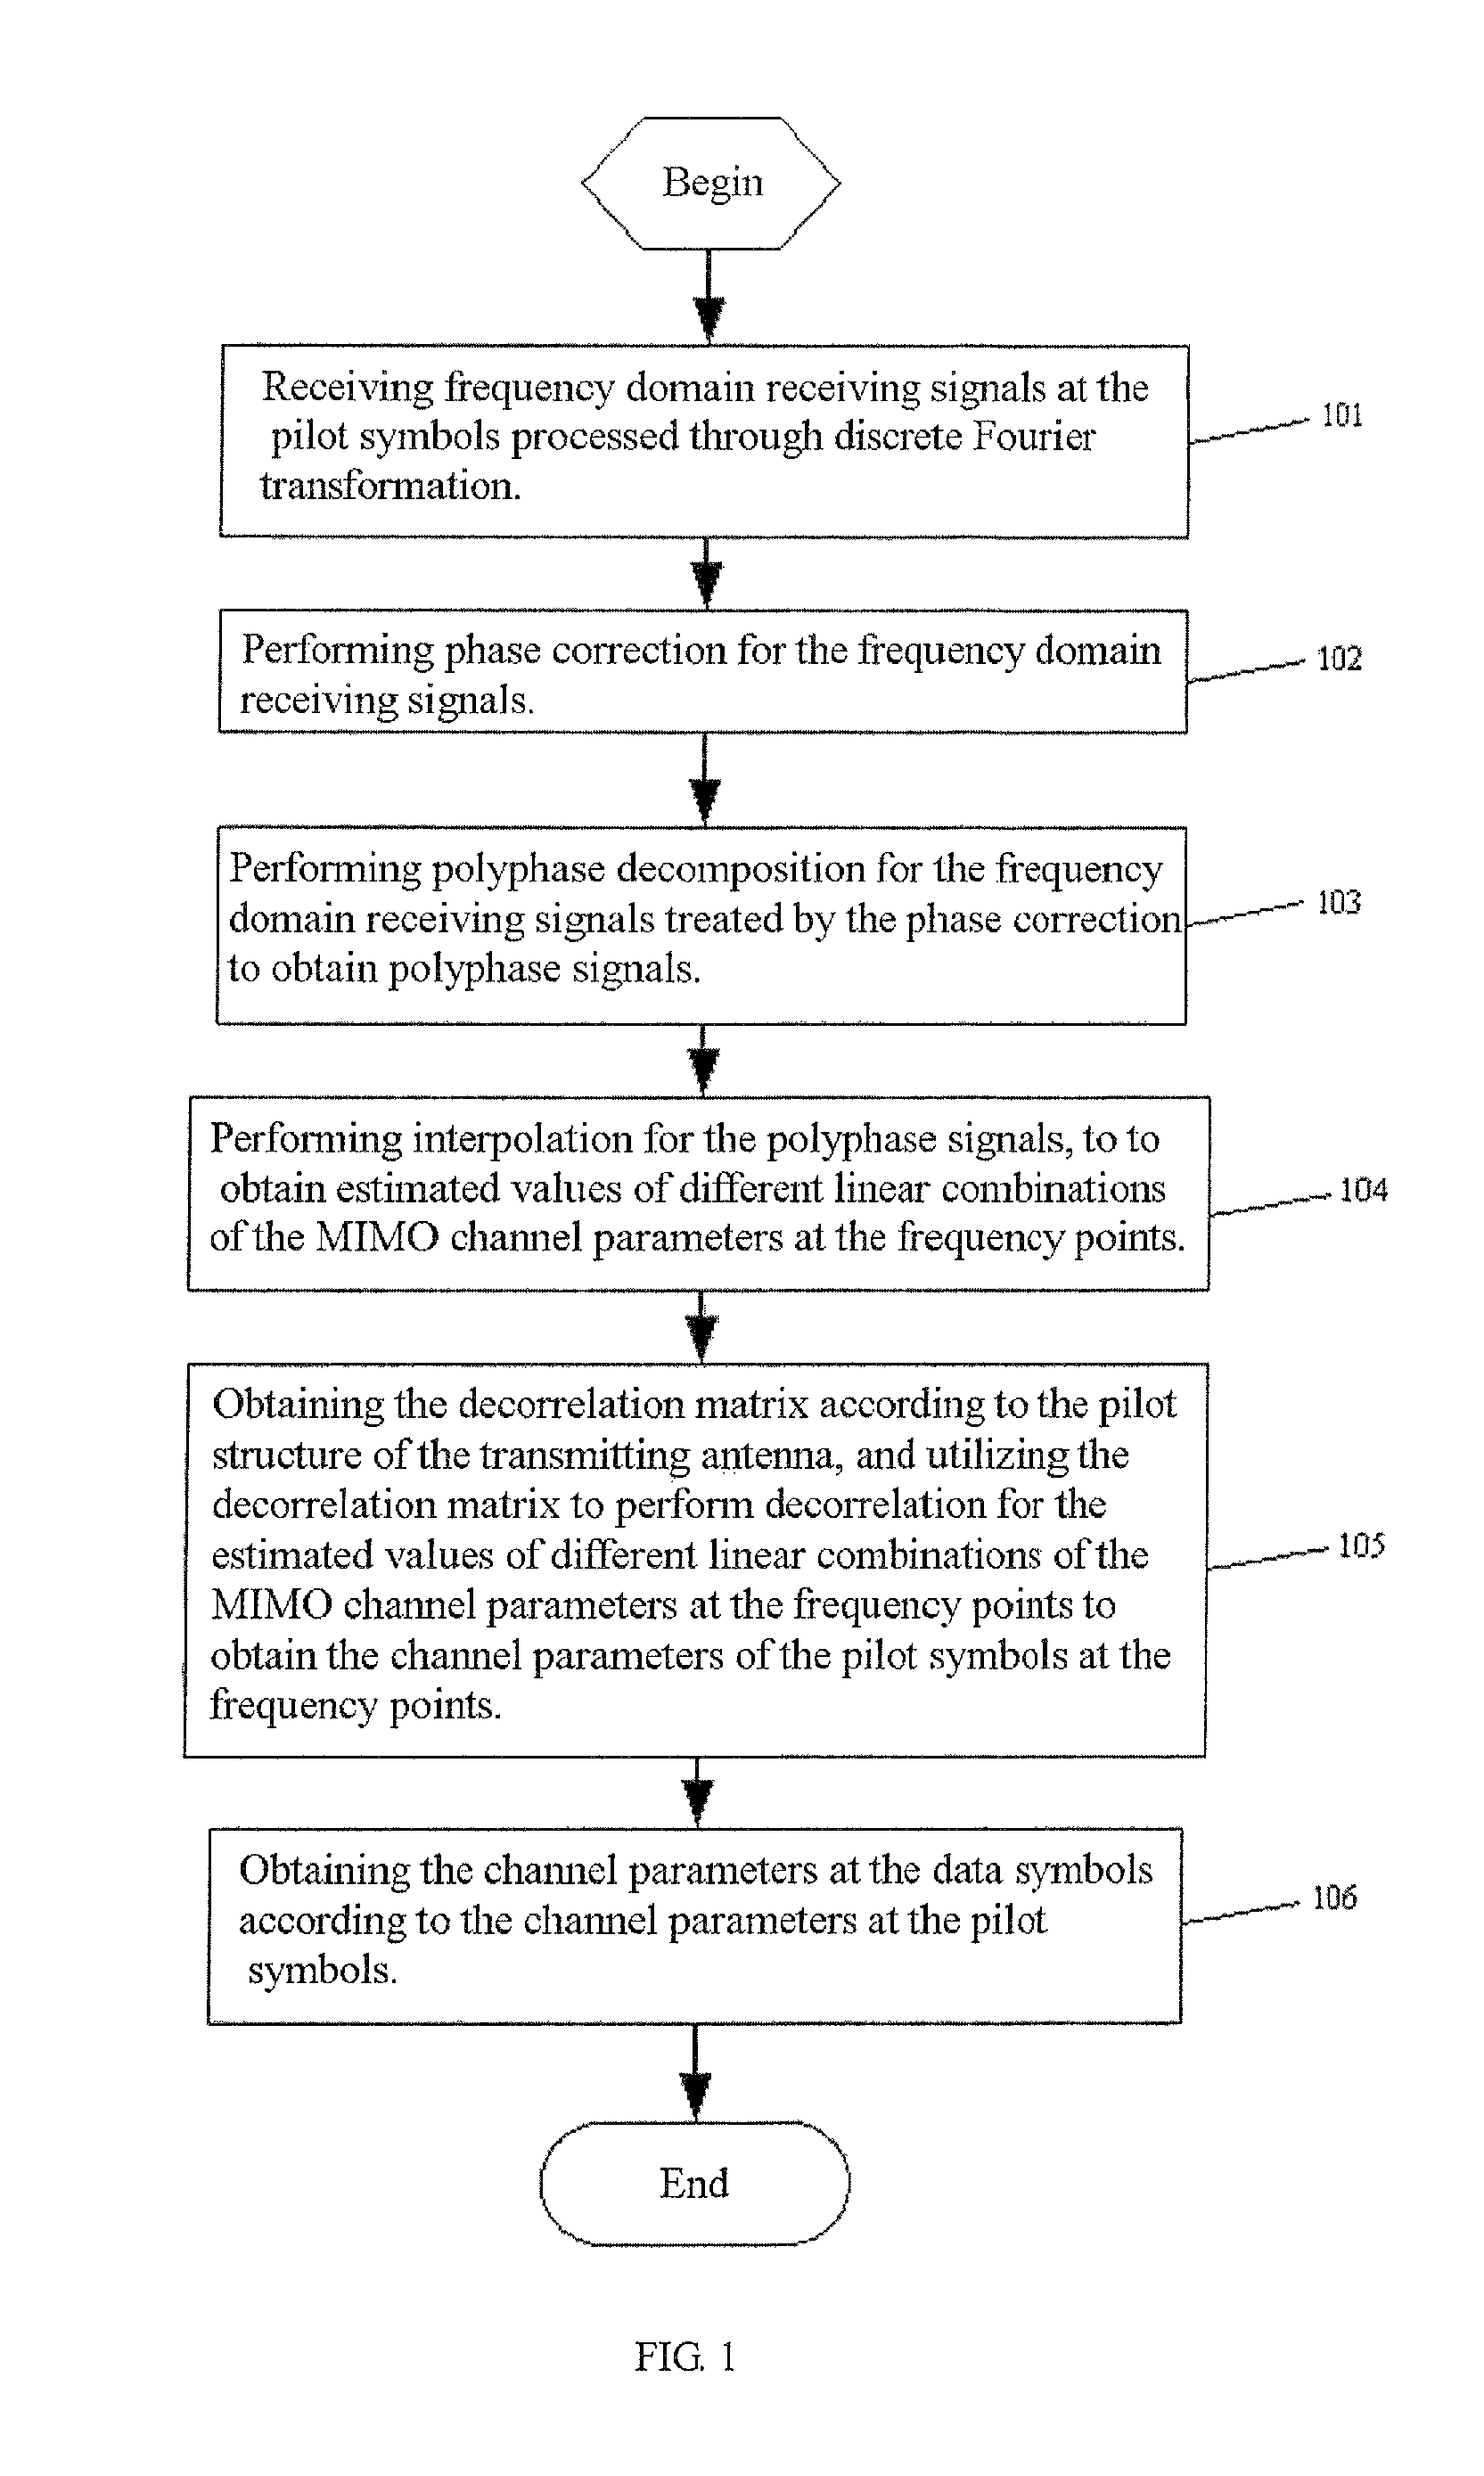 Multi-antenna channel estimation method based on polyphase decomposition